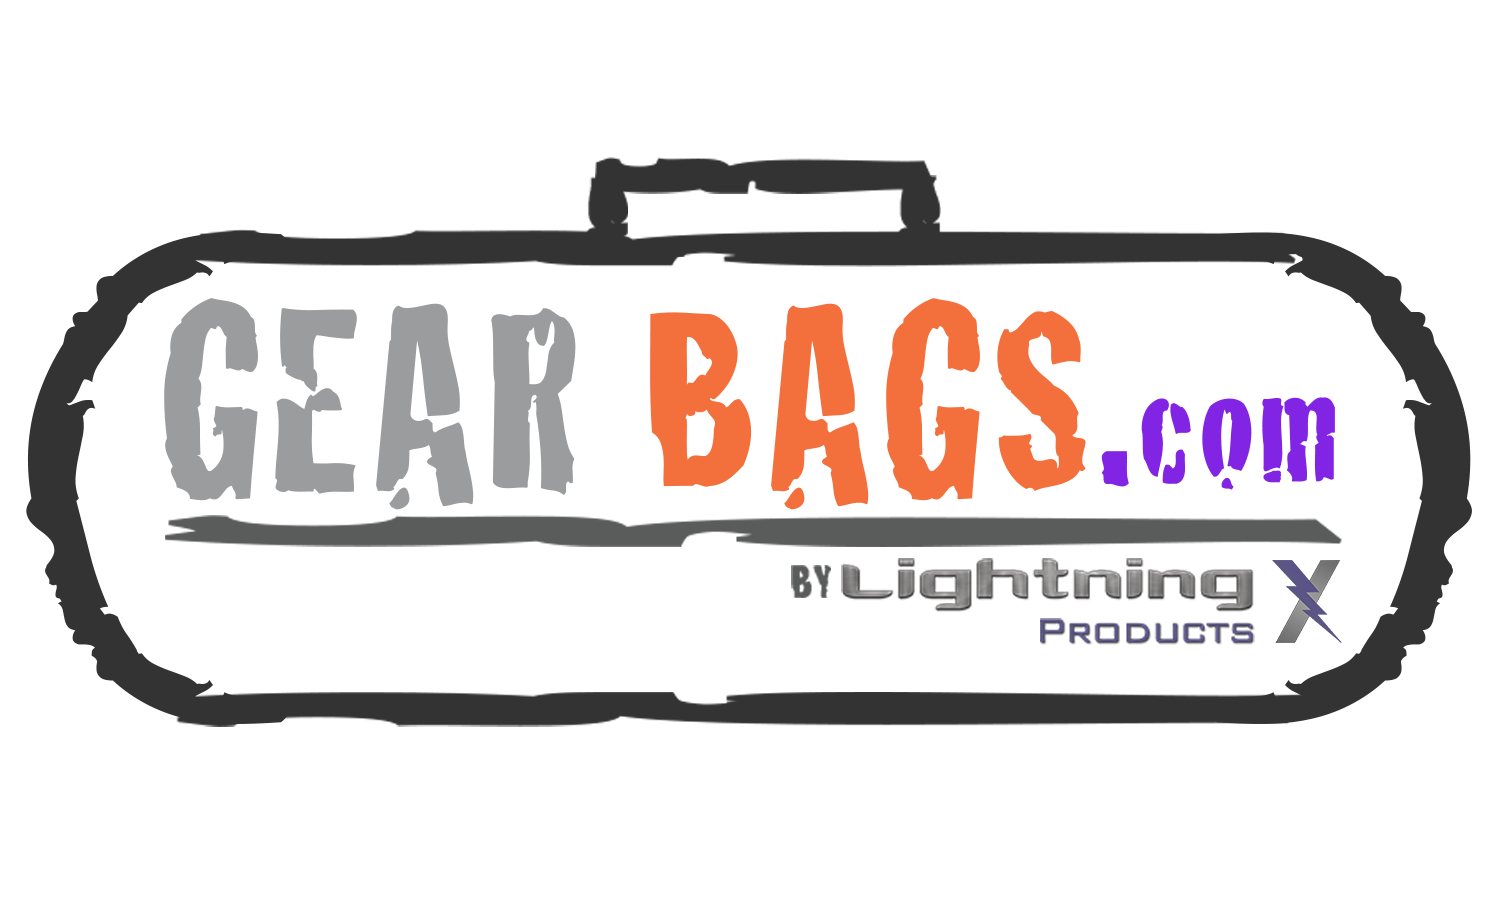 Gearbags.com